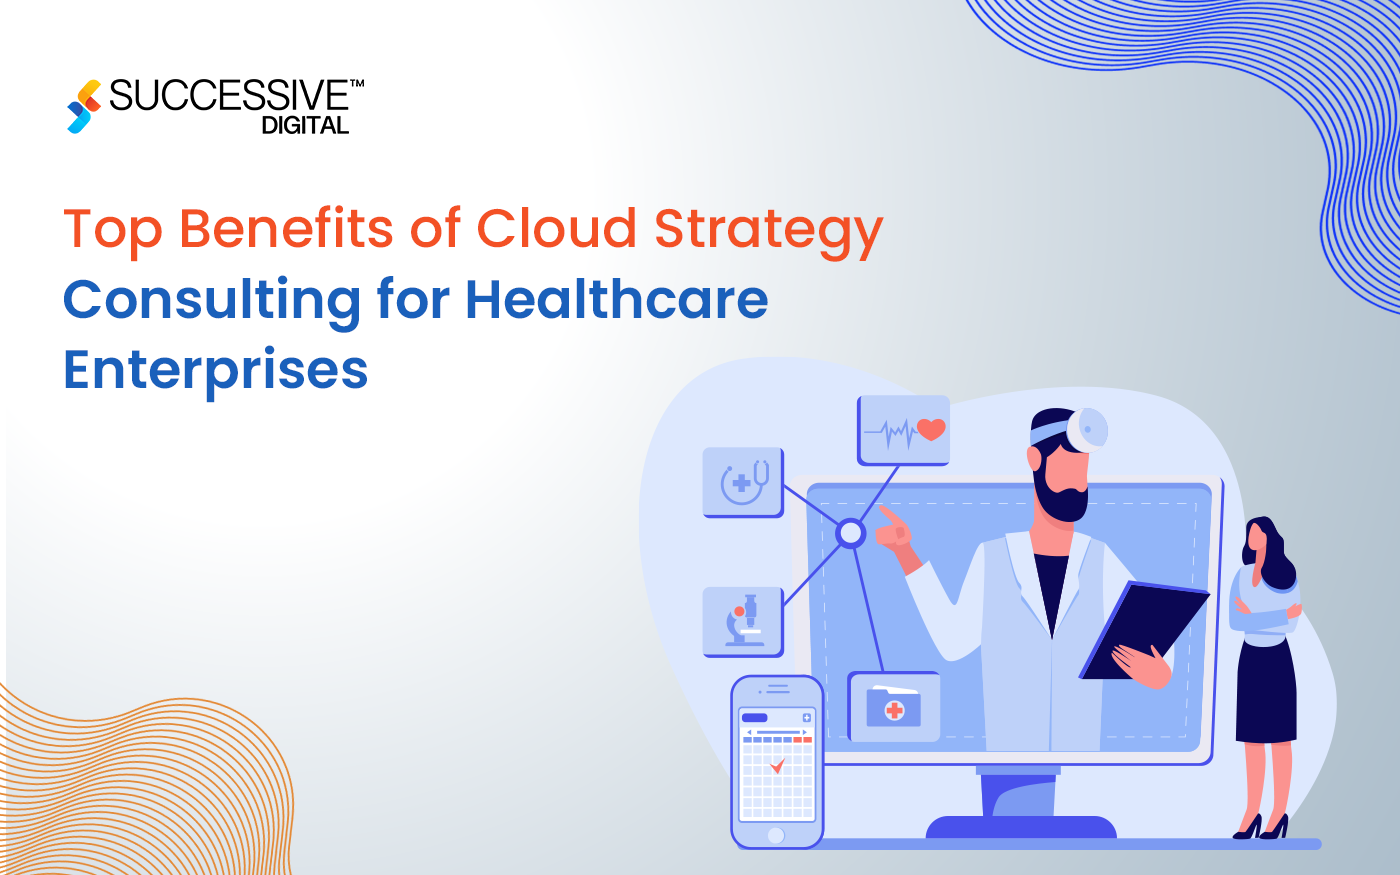 Top Benefits of Cloud Strategy Consulting for Healthcare Enterprises